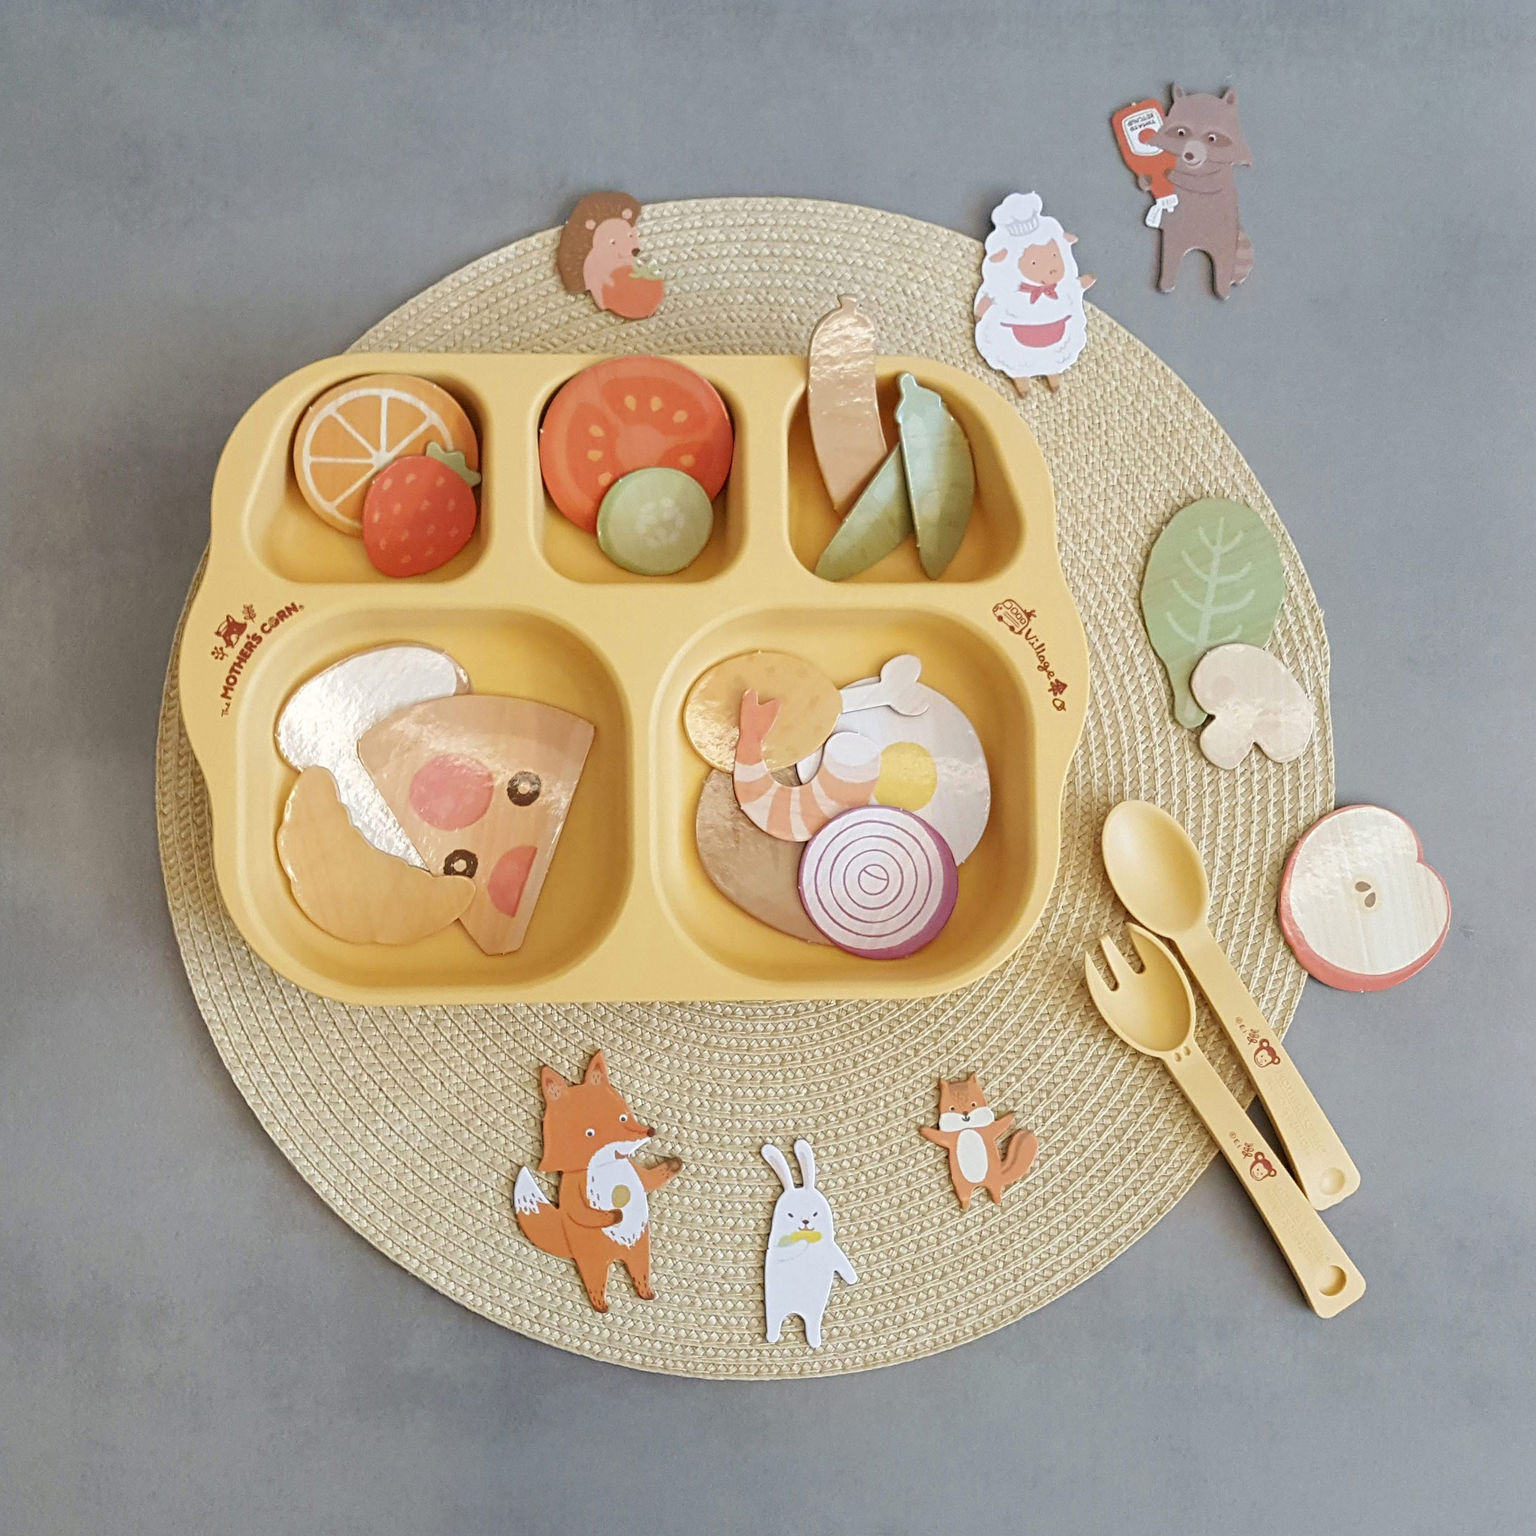 PLAY&LEARN MEALTIME SET